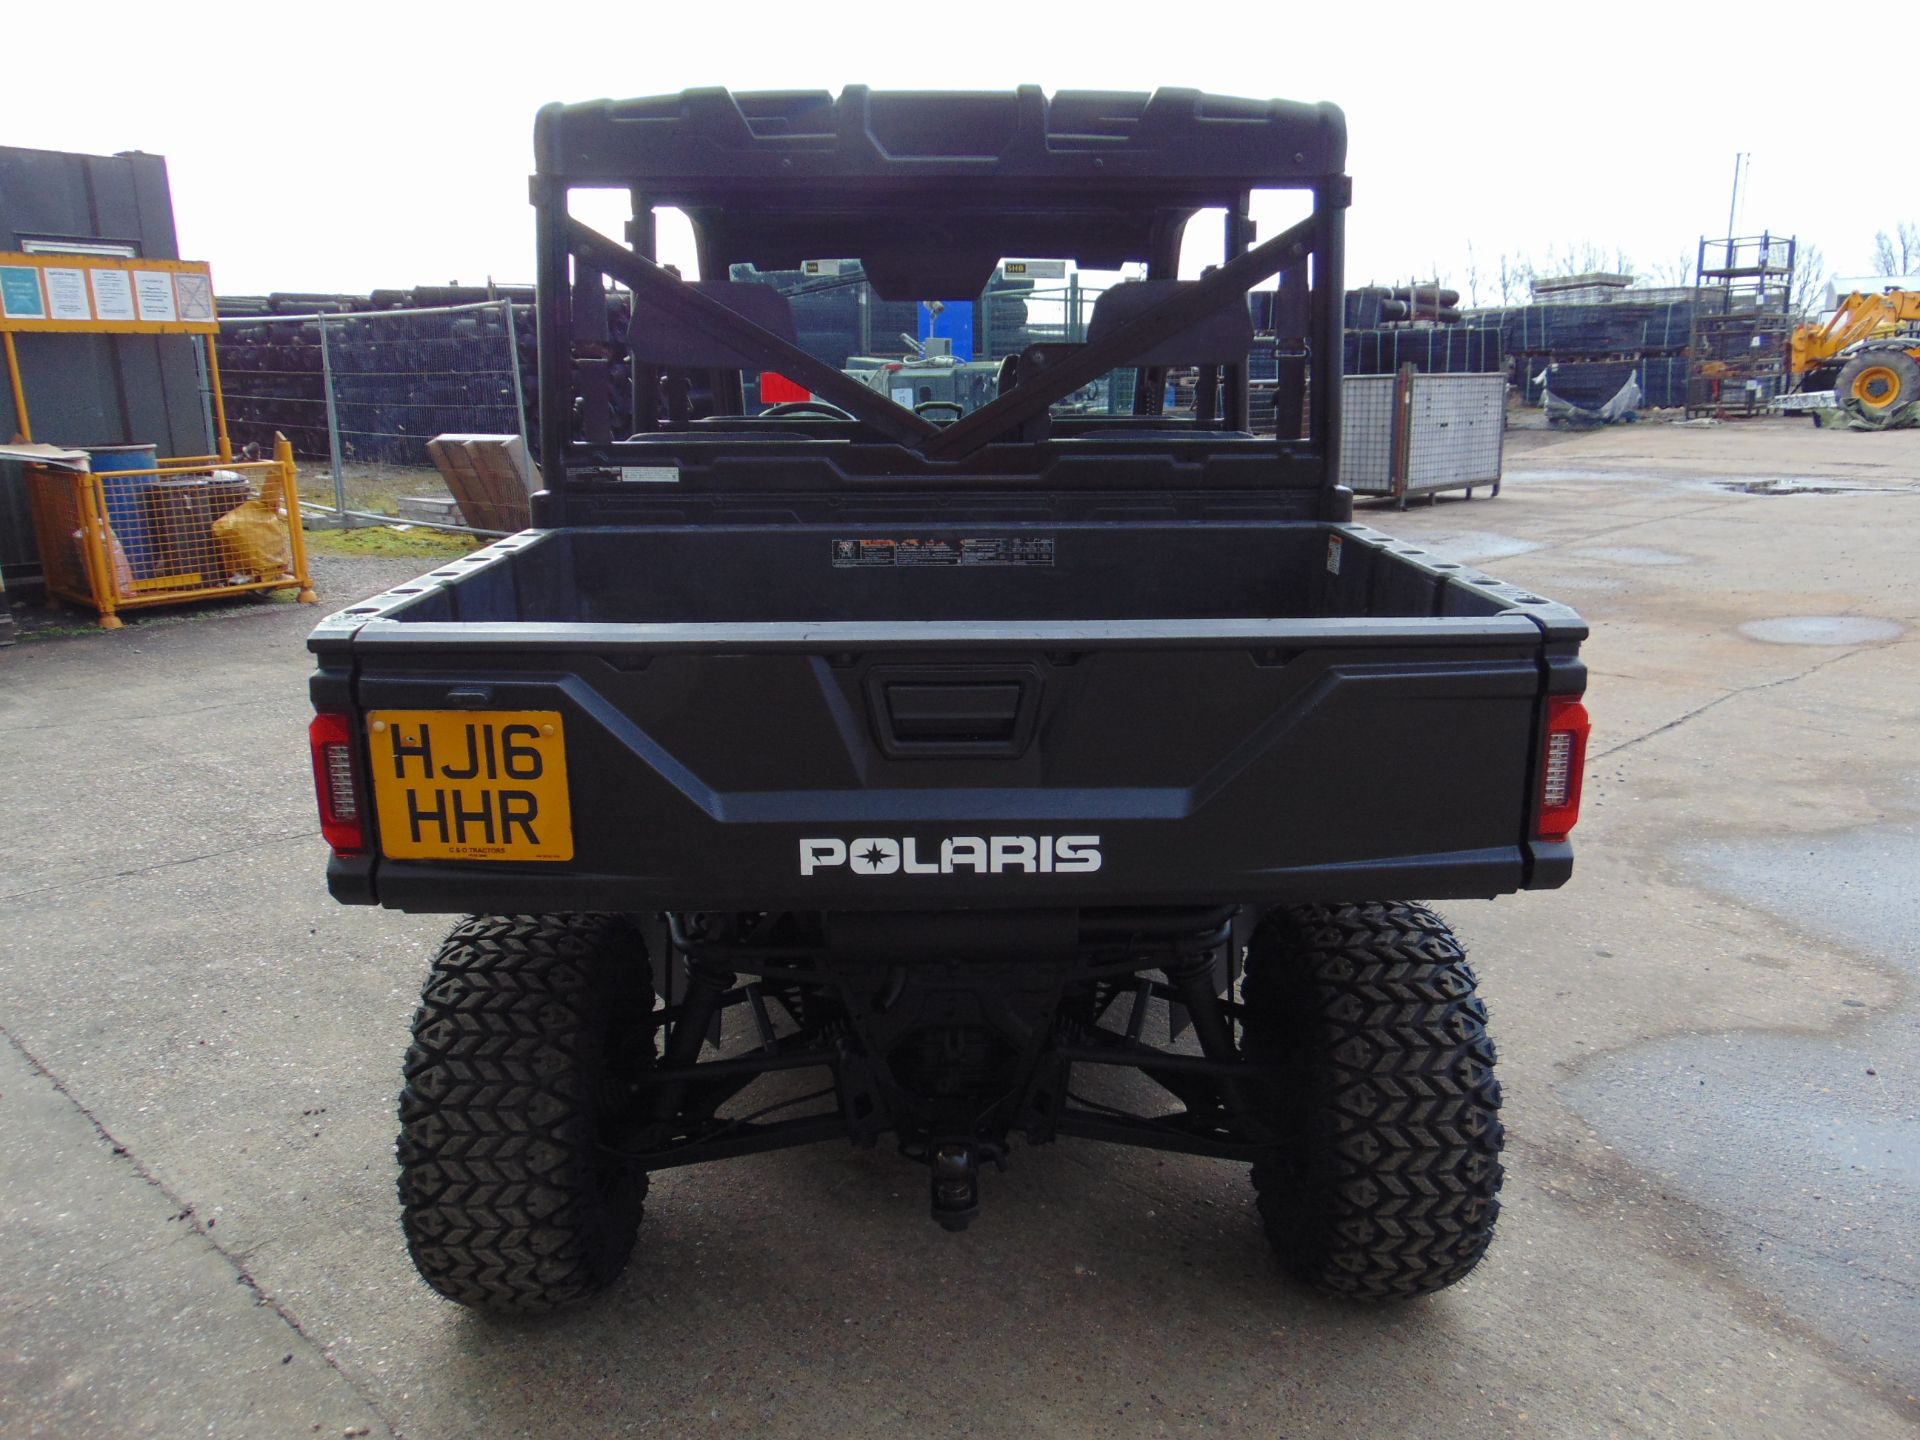 Polaris Ranger Crew Cab Diesel Utility Vehicle 1,190 Hrs only from Govt Dept - Image 8 of 25